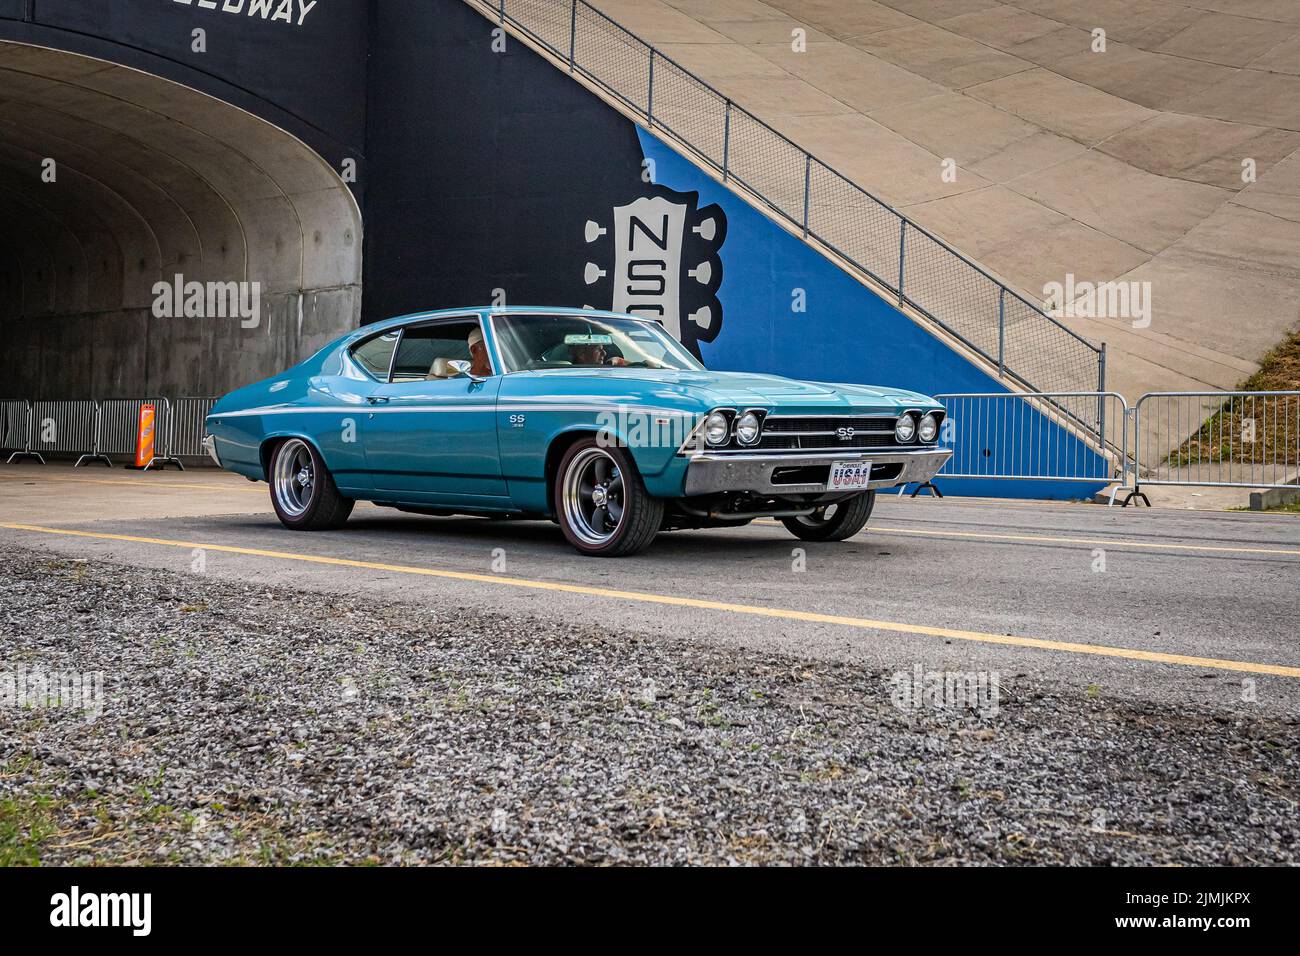 Lebanon, TN - May 14, 2022: Wide angle front corner view of a 1969 Chevrolet Chevelle SS 396 Coupe driving on a road leaving a local car show. Stock Photo